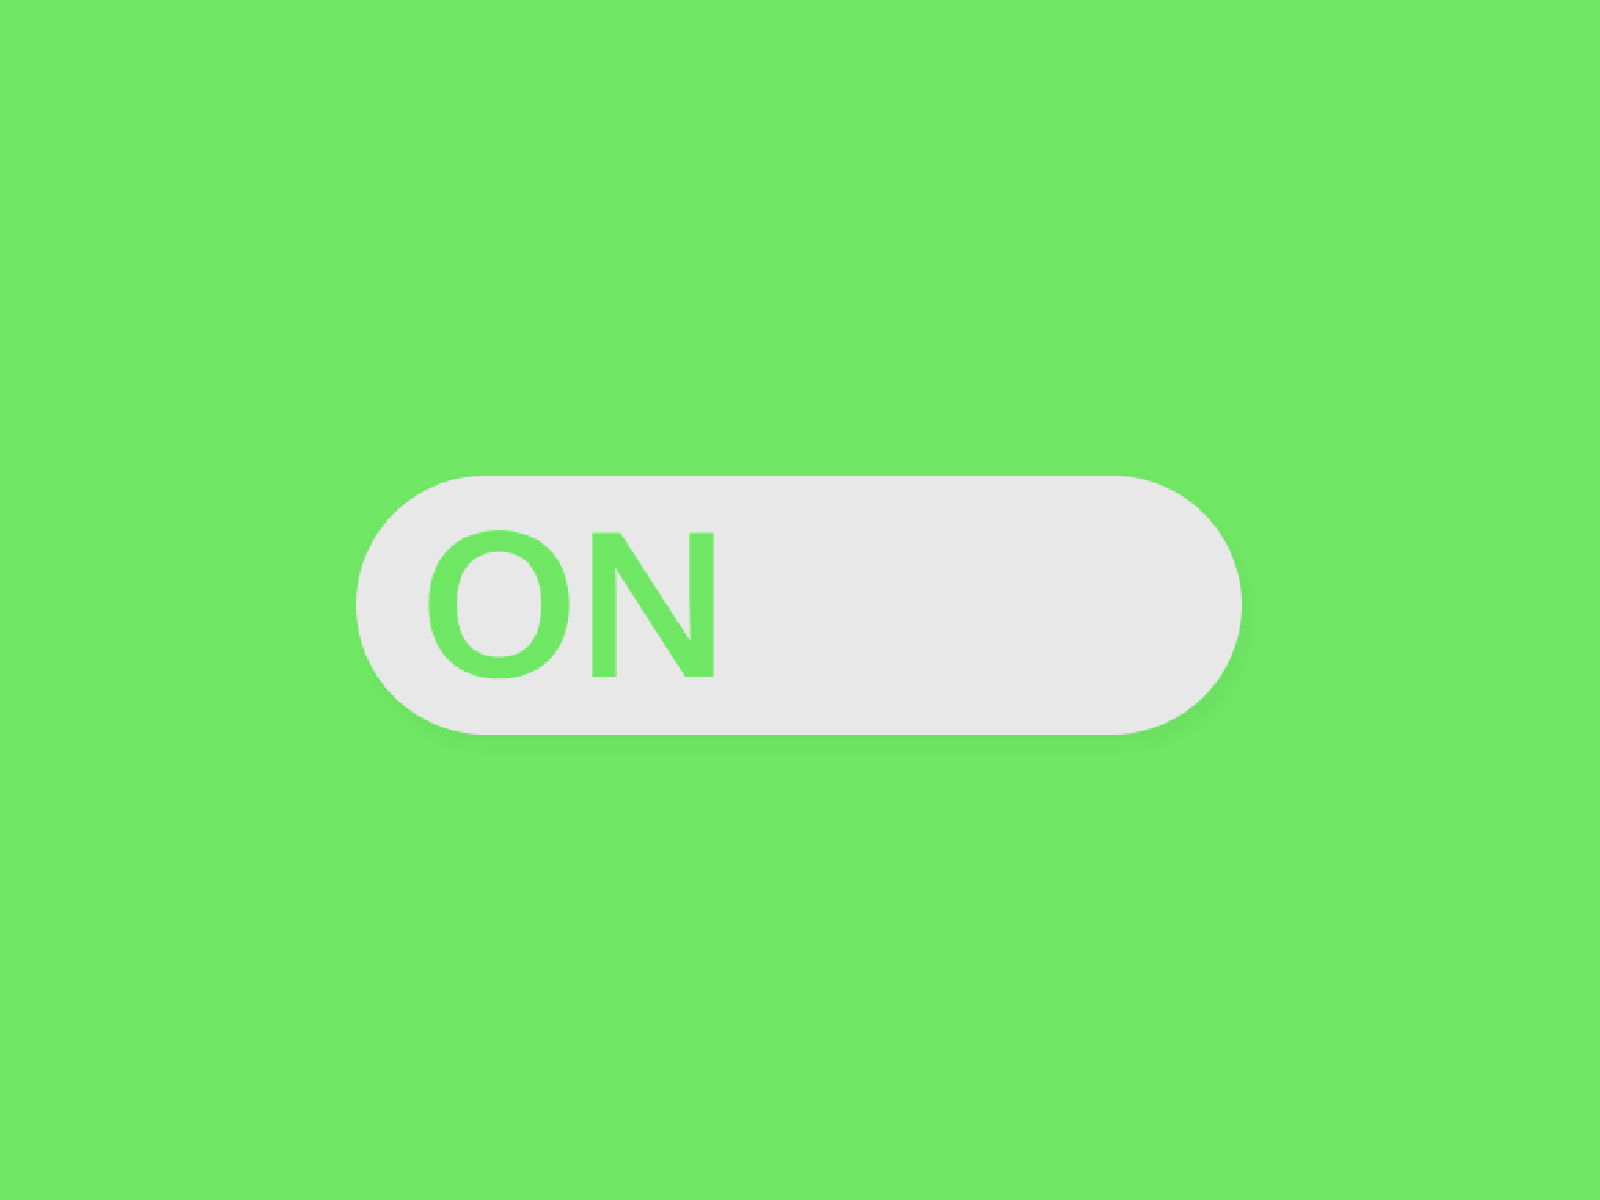 DAY15 - On/off switch 015 after effects dailyui design ui vector